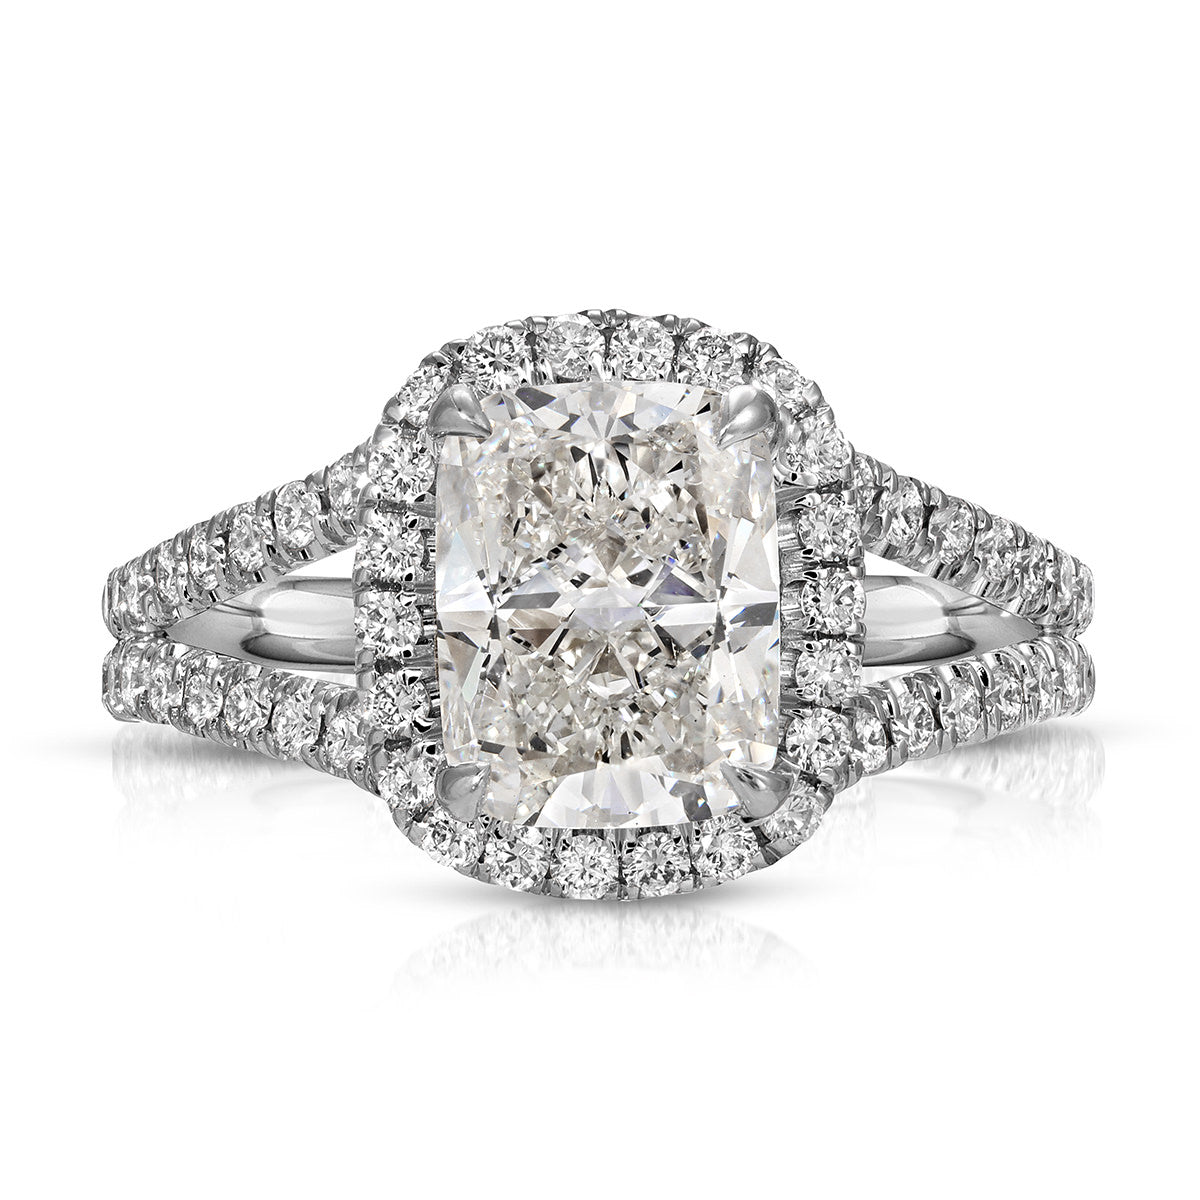 Double Halo Cushion Engagement Ring in White Gold